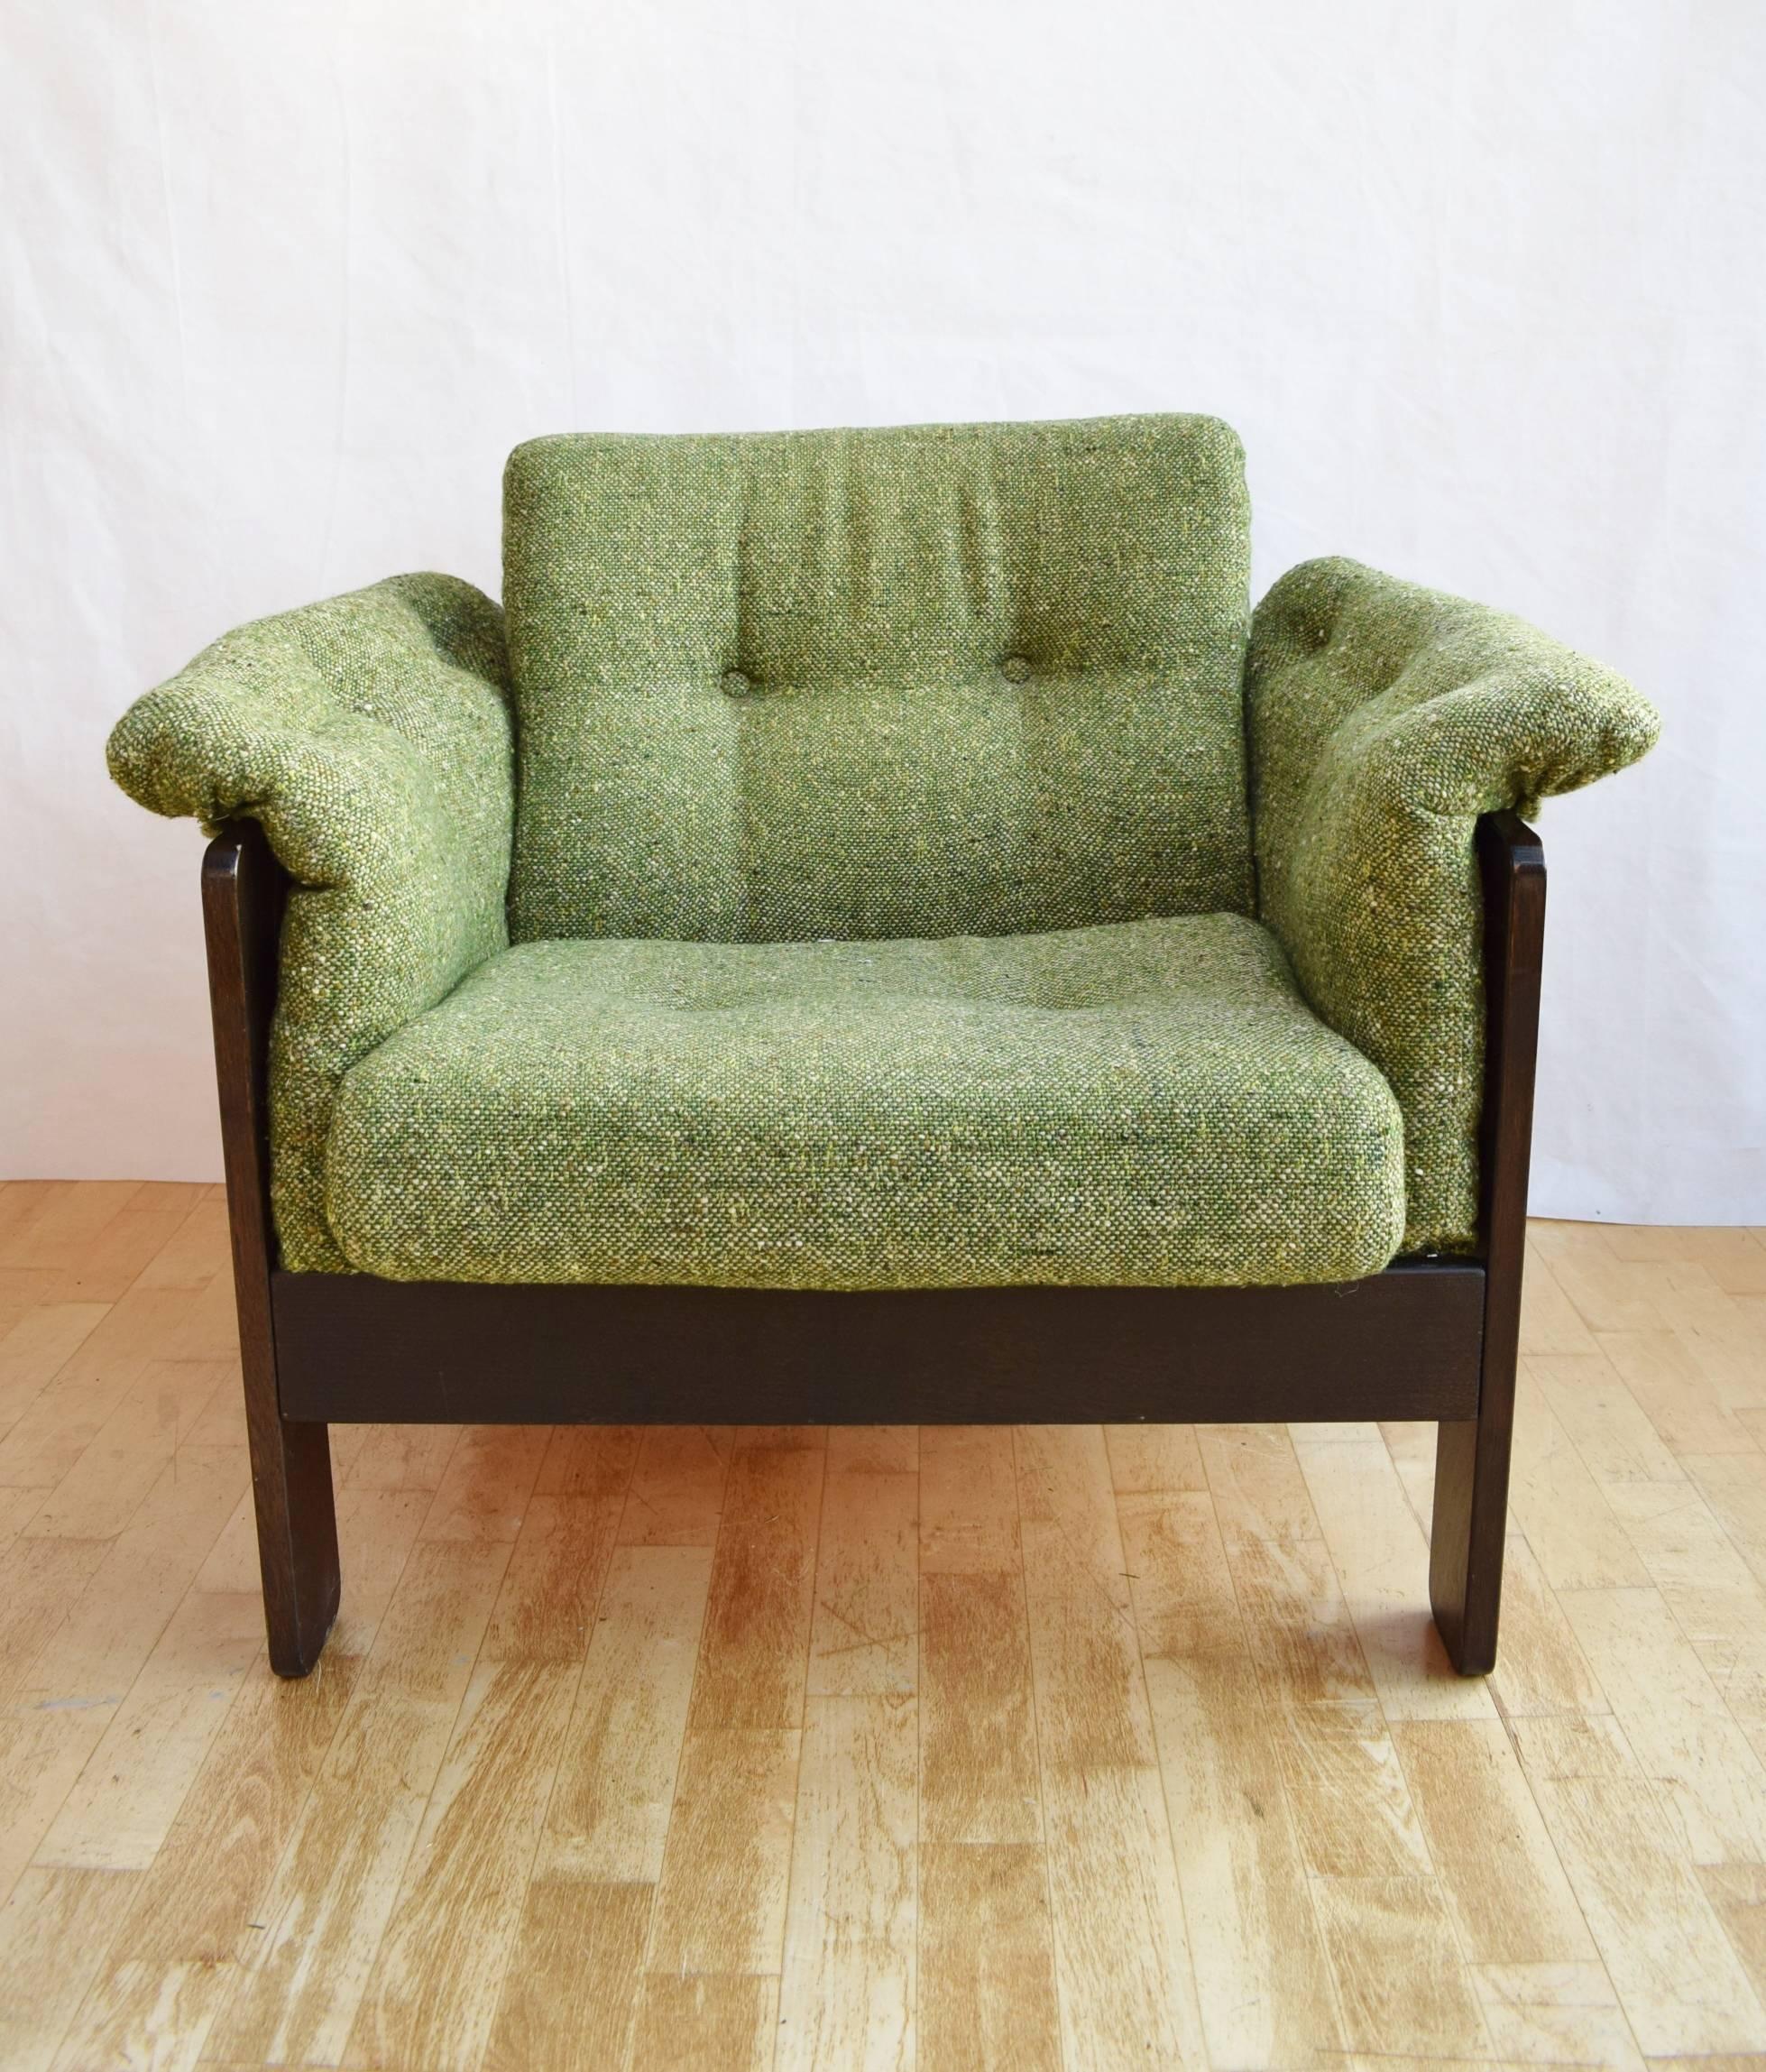 Designer: Danish Design

Manufacturer: Unknown

Country: Denmark

Date: 1970s

Material: Stained Beech frame with Green Wool upholstery

Maximum Dimensions: Width 94cm, depth 85cm, height 70cm and seat height 41cm

Condition: Overall